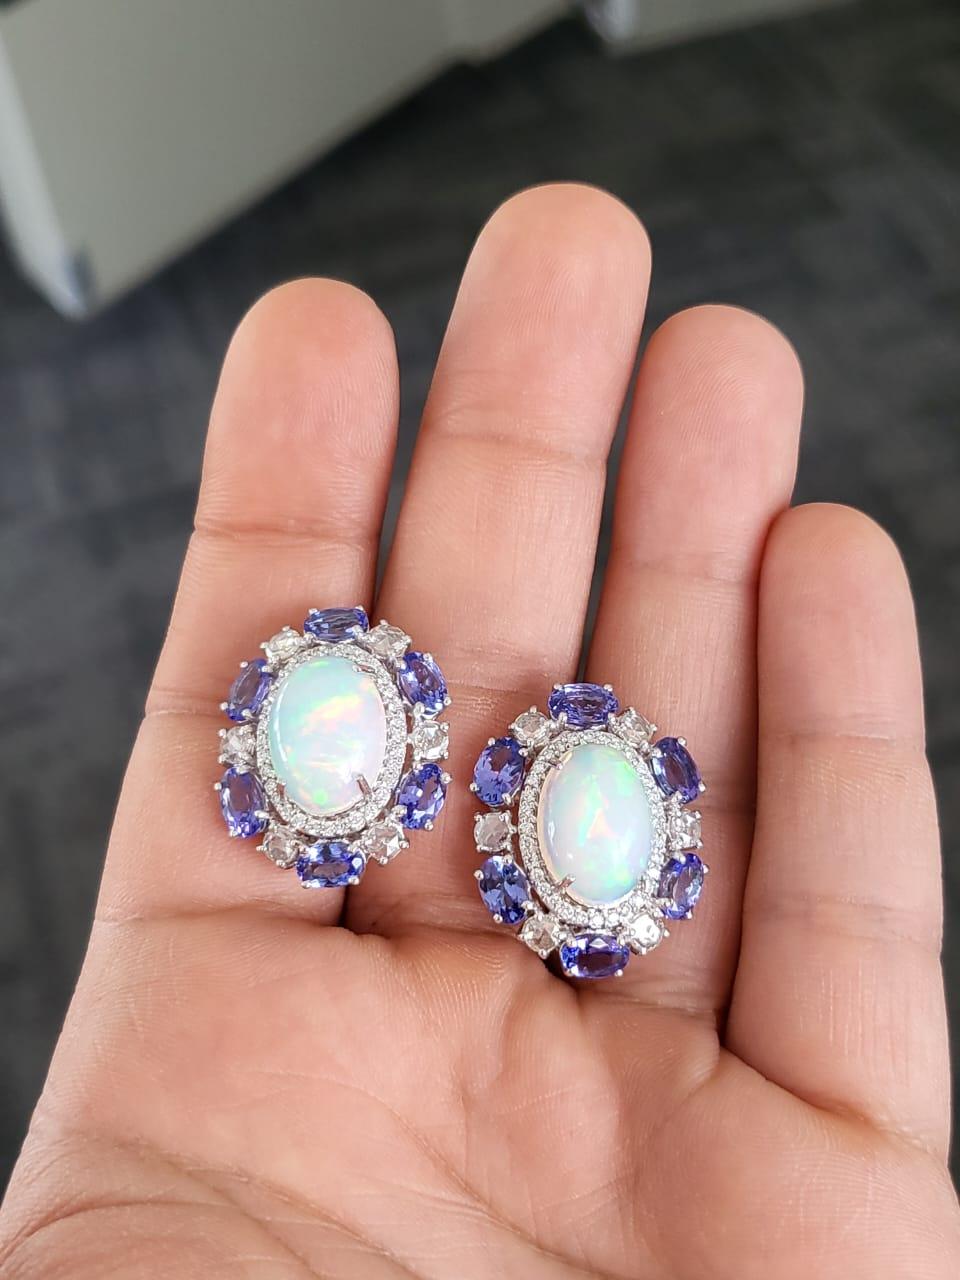 A very gorgeous and one of a kind, Opal & Tanzanite Stud / Lever - Back Earrings set in 18K White Gold & Diamonds. The weight of the Ethiopian Opals are 7.70 carats. The weight of the Tanzanites is 5.90 carats. The Tanzanites are completely natural,